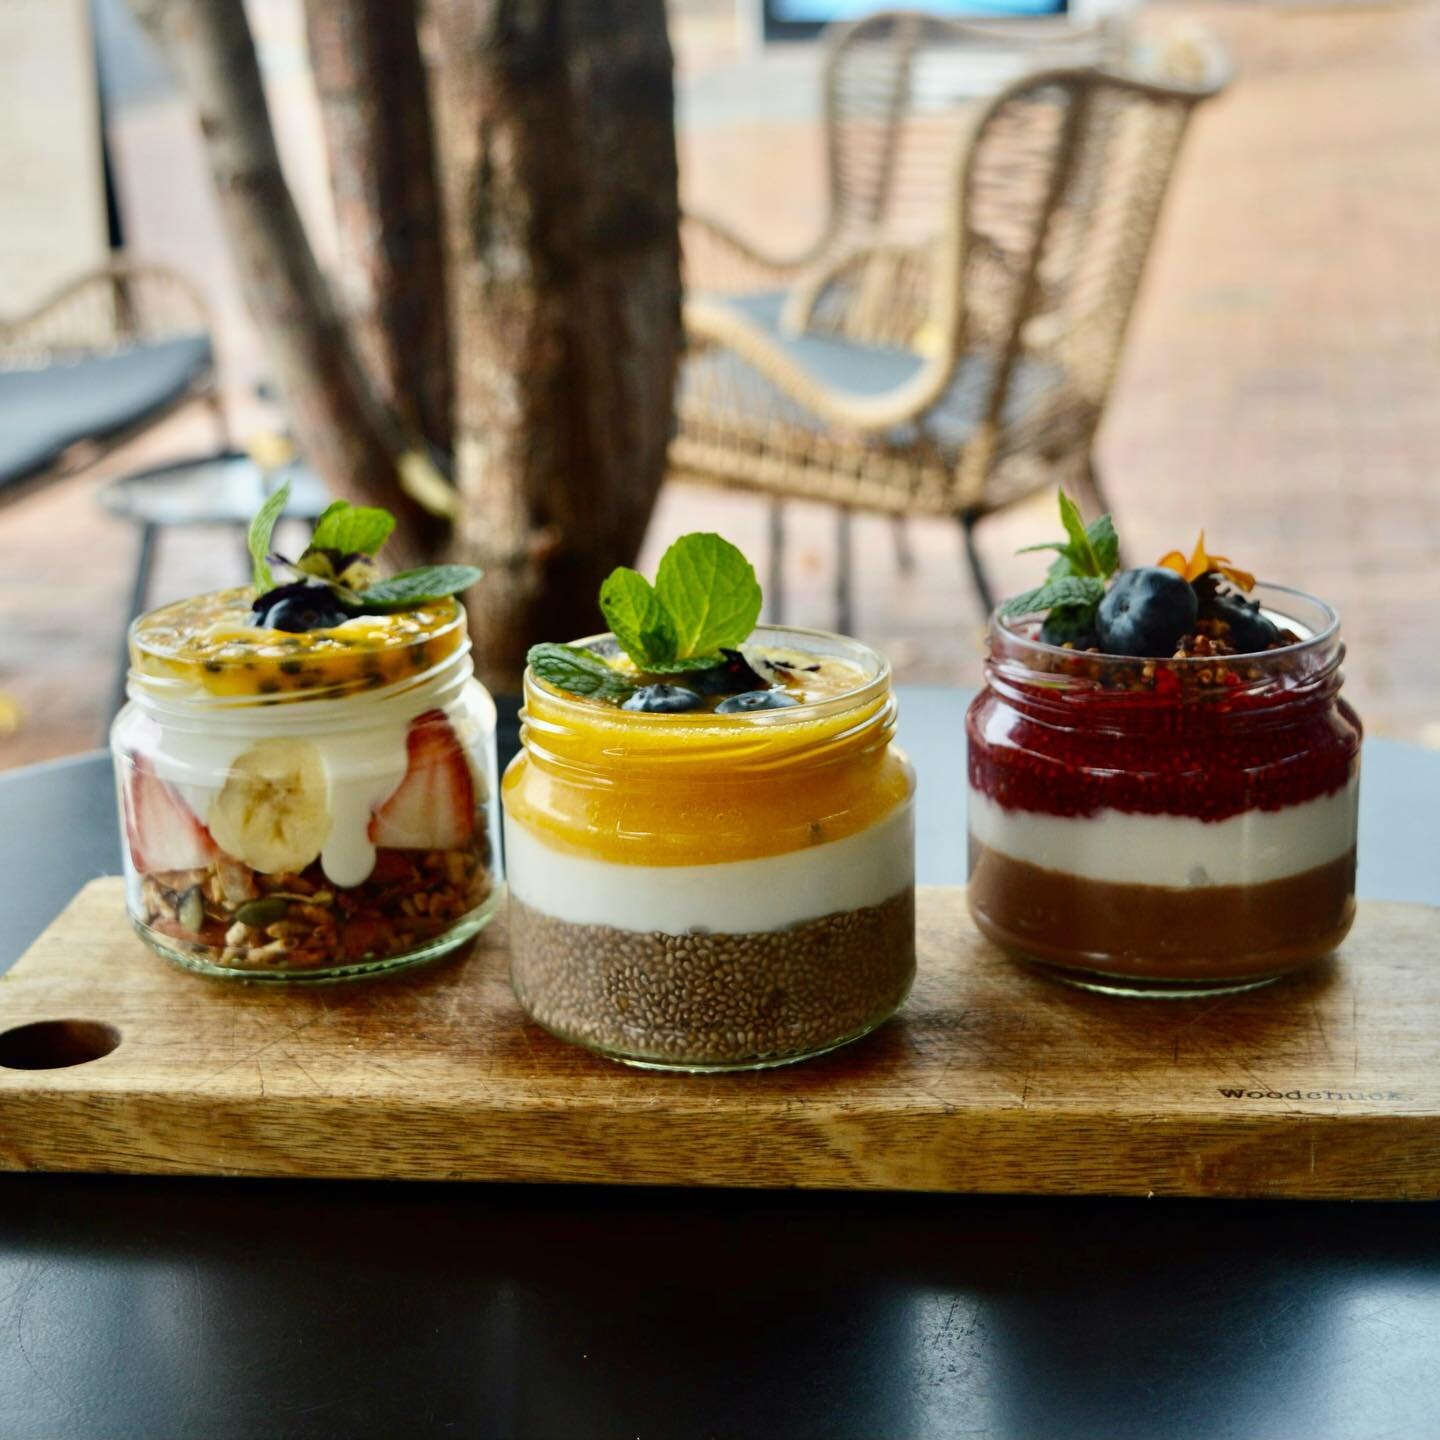 What&rsquo;s your favourite? Our vegan and gluten friendly breakfast jars are the perfect grab and go option&hellip; or take a seat and enjoy with us!